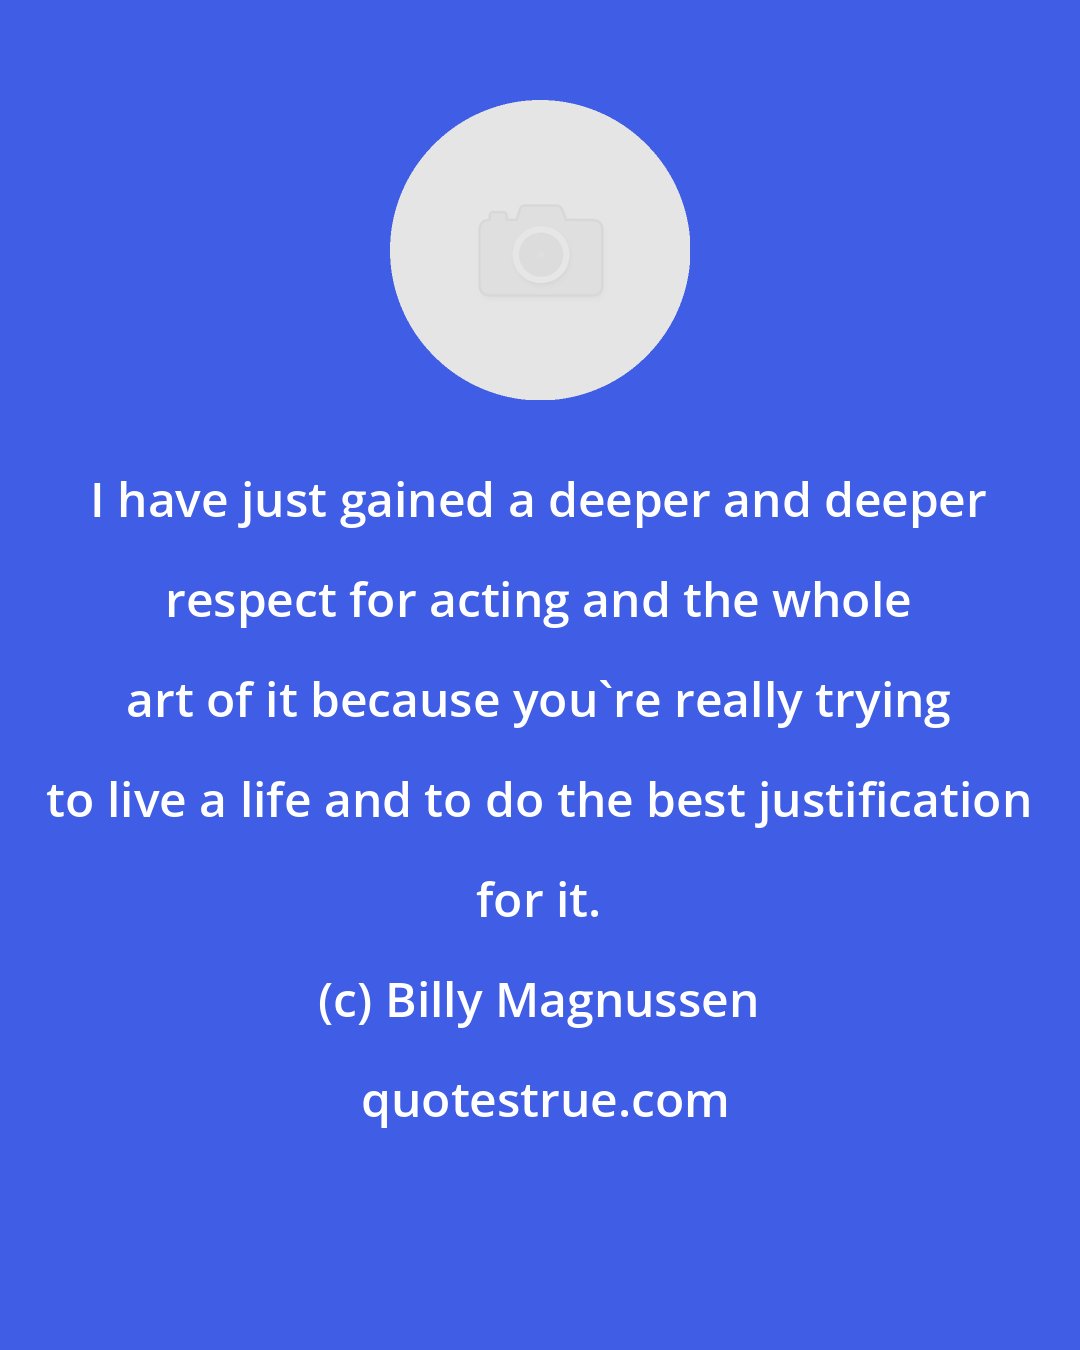 Billy Magnussen: I have just gained a deeper and deeper respect for acting and the whole art of it because you're really trying to live a life and to do the best justification for it.